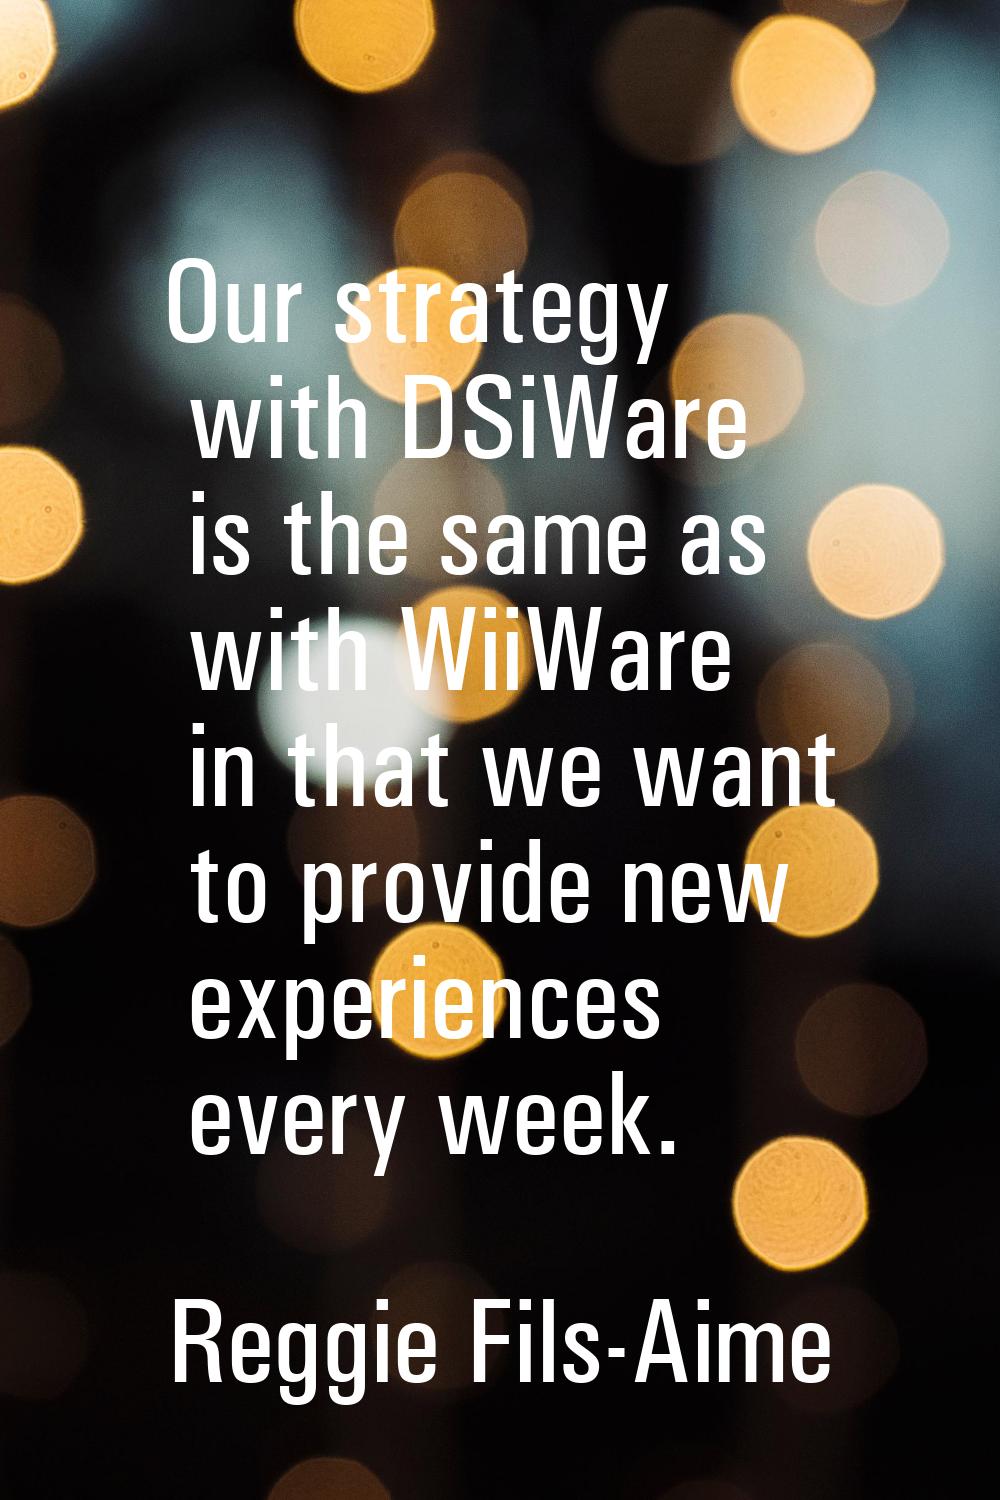 Our strategy with DSiWare is the same as with WiiWare in that we want to provide new experiences ev